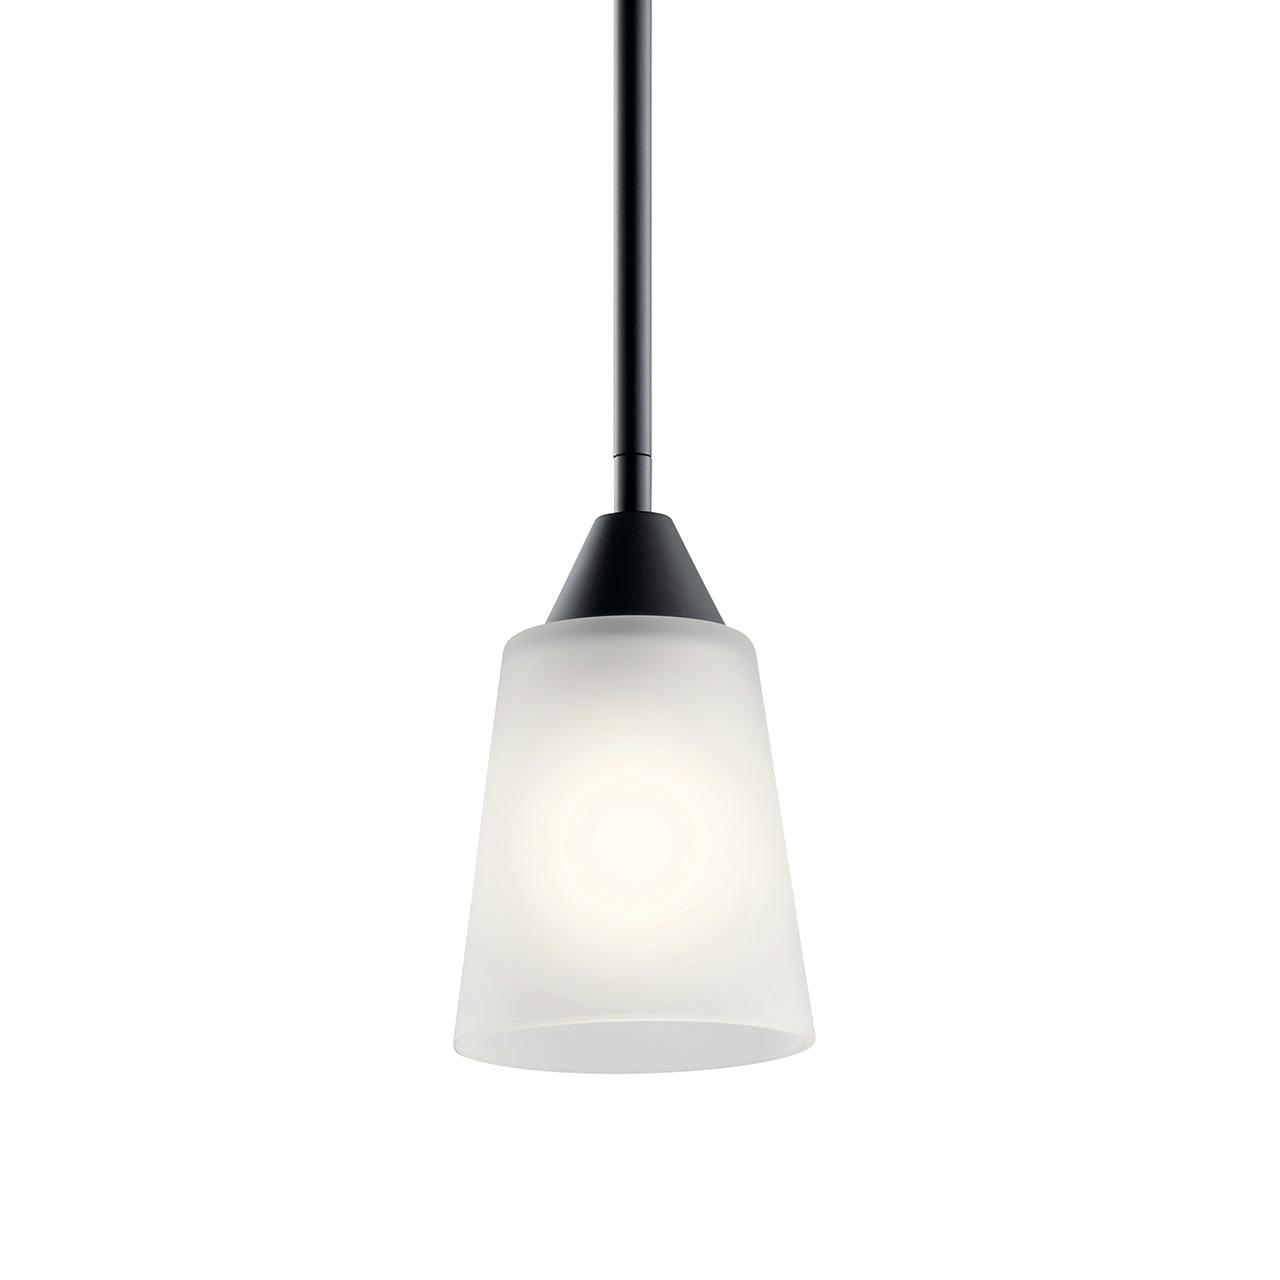 Skagos™ 1 Light Mini Pendant Black without the canopy on a white background